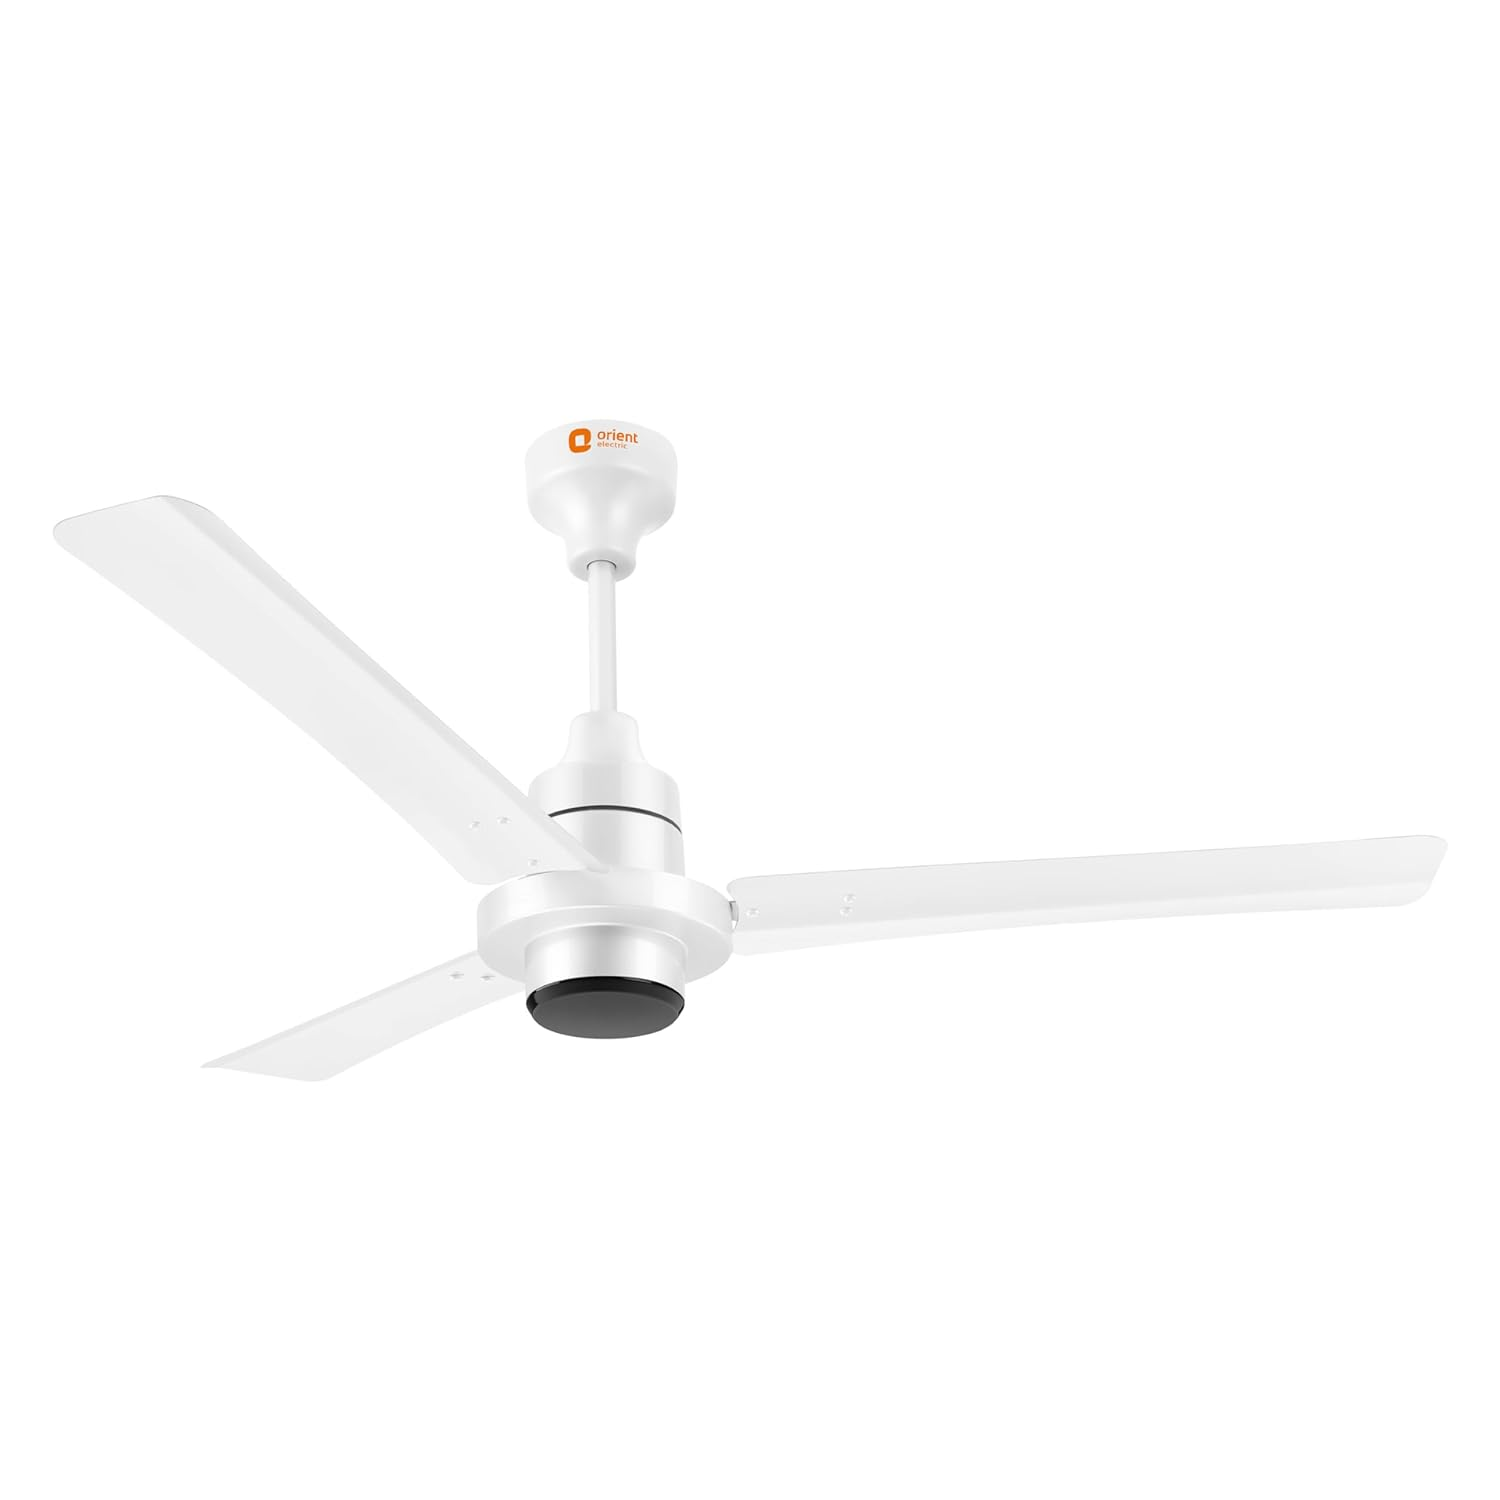 Orient Electric I-Tome 1200mm 26W Intelligent BLDC Energy Saving Ceiling Fan with Remote Control